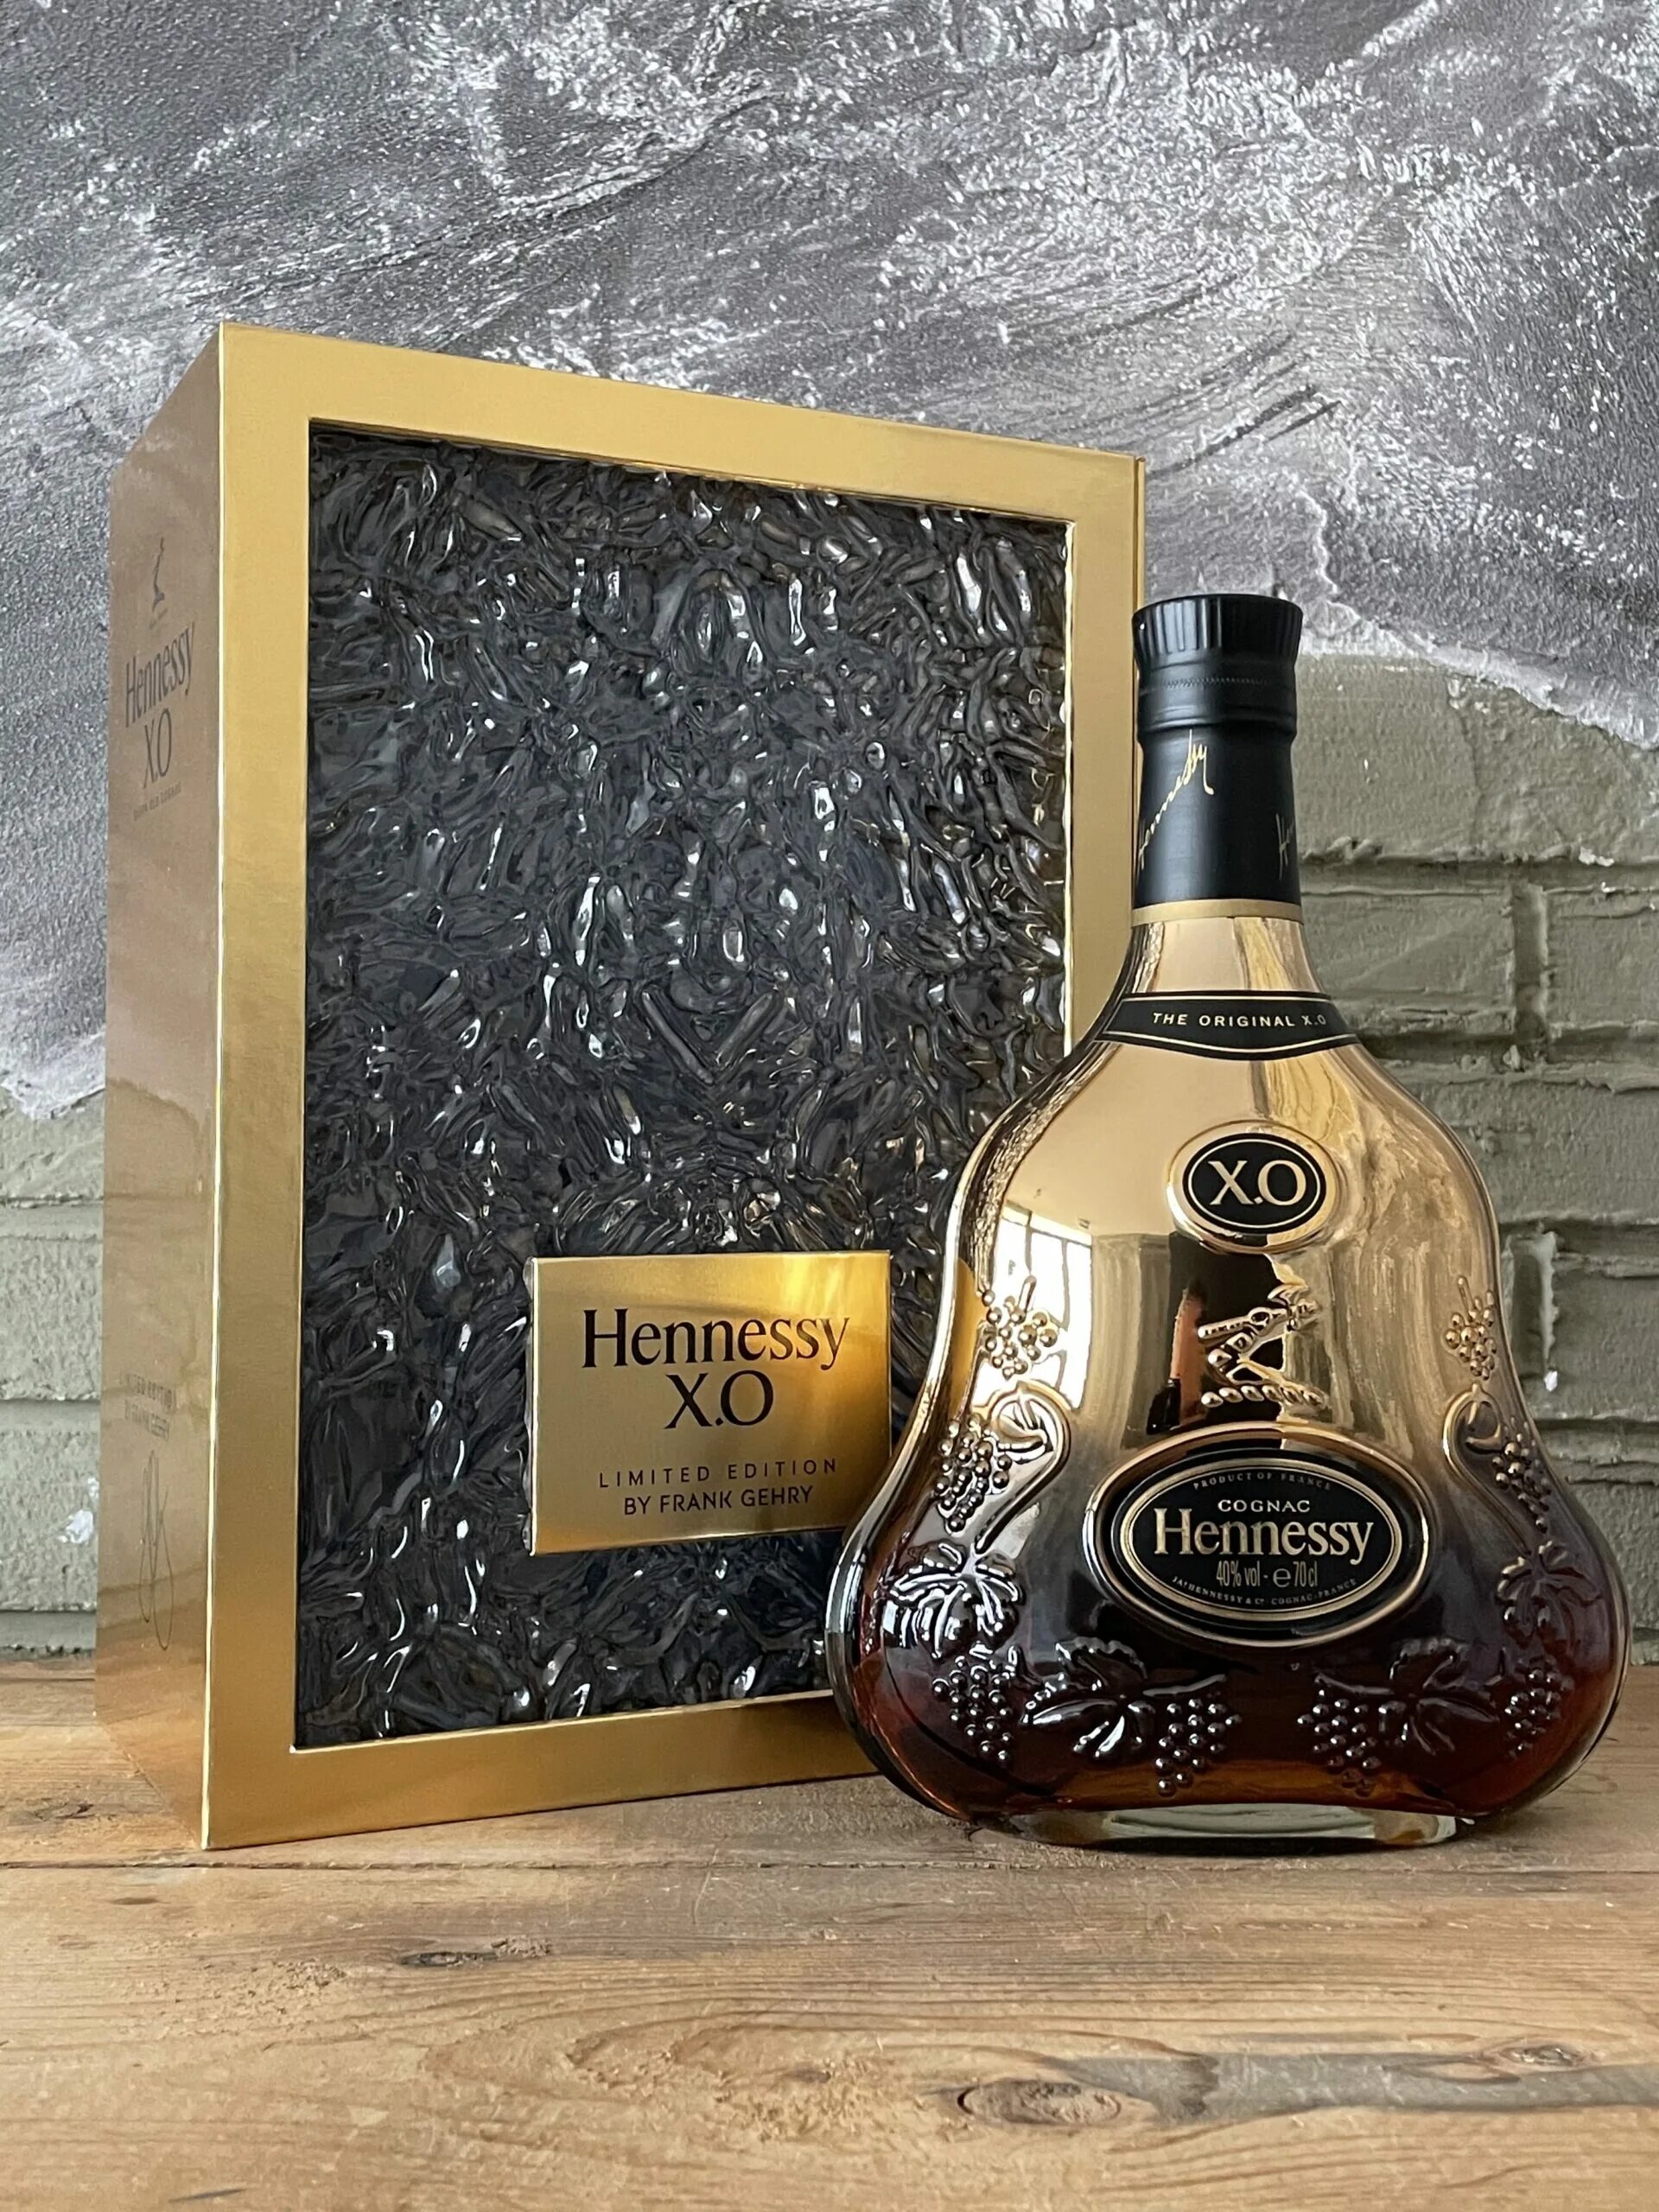 Hennessy XO Лимитед. Hennessy x.o Extra old Cognac Limited Edition. Hennessy XO Limited Edition. Hennessy XO 700 мл. Хеннесси 0.7 оригинал